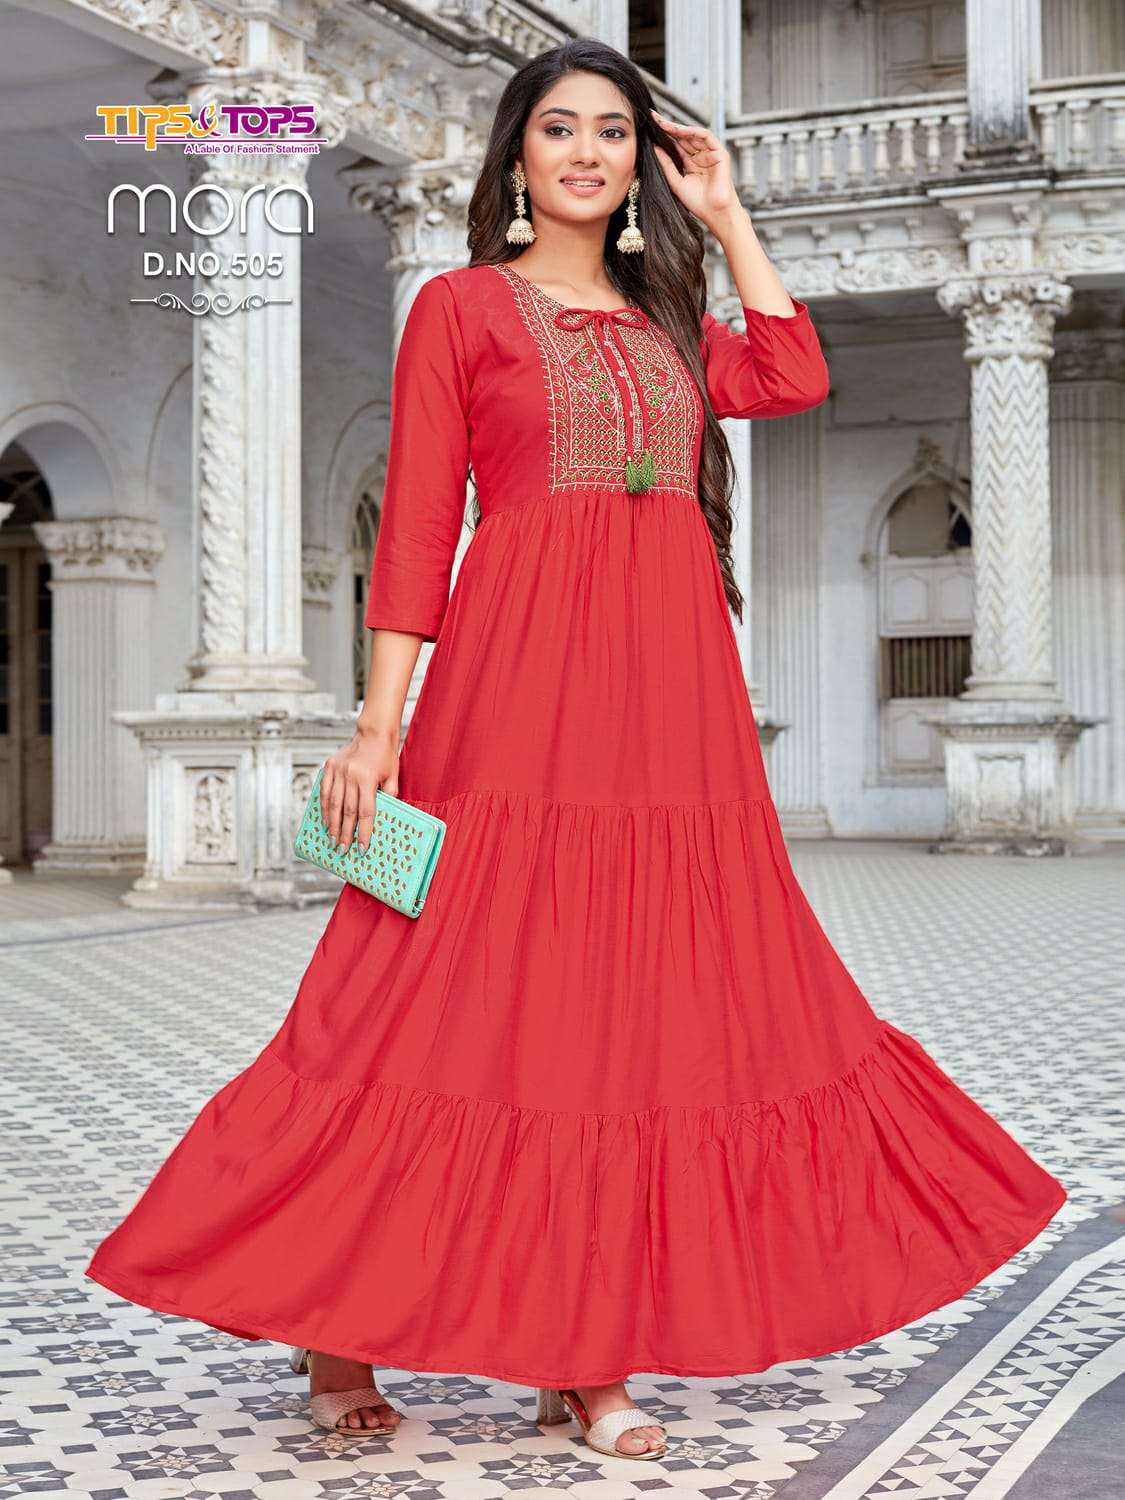 BUY TIPS &TOPS MORA VOL 5 BRANDED ONE PIECE GOWN CATALOG ONLINE WHOLESALER LOWEST PRICE AT SAIDHARANX